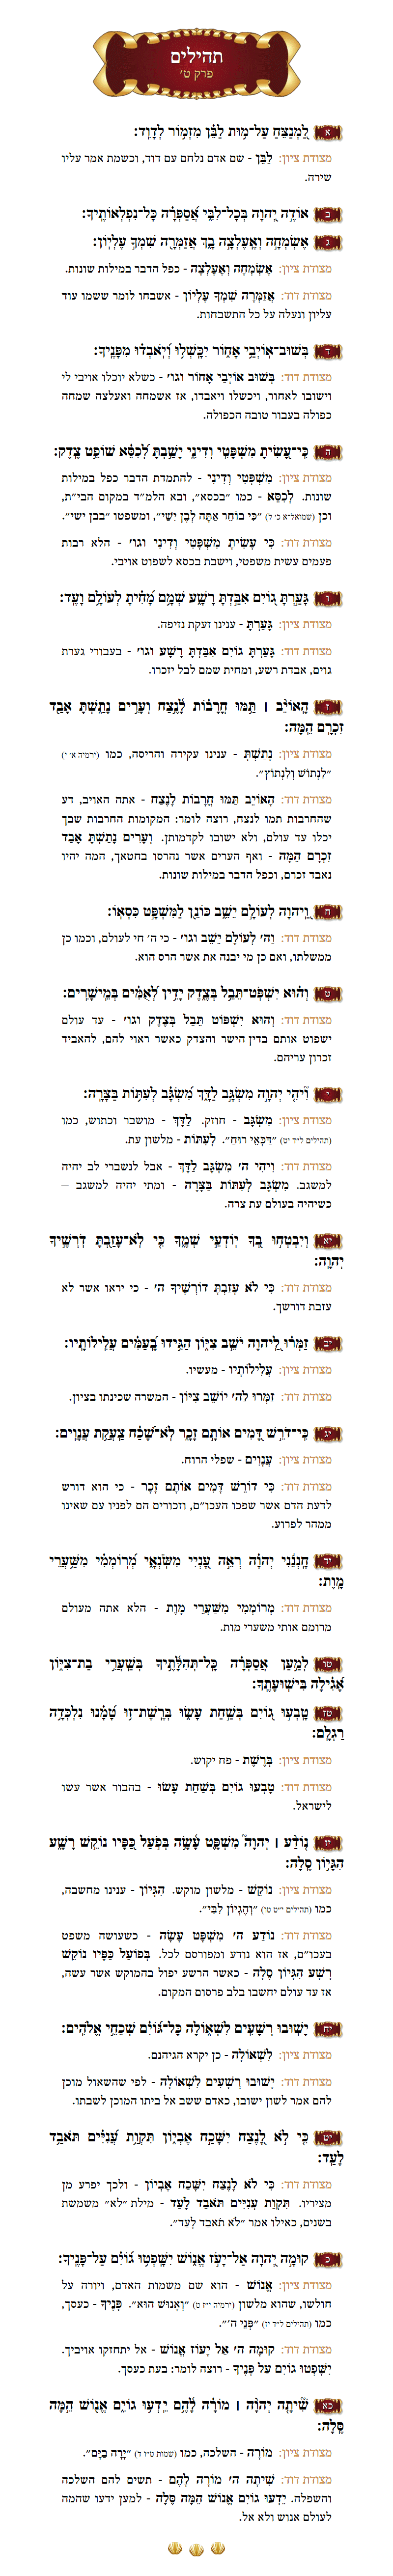 Sefer Tehillim Chapter 9 with commentary